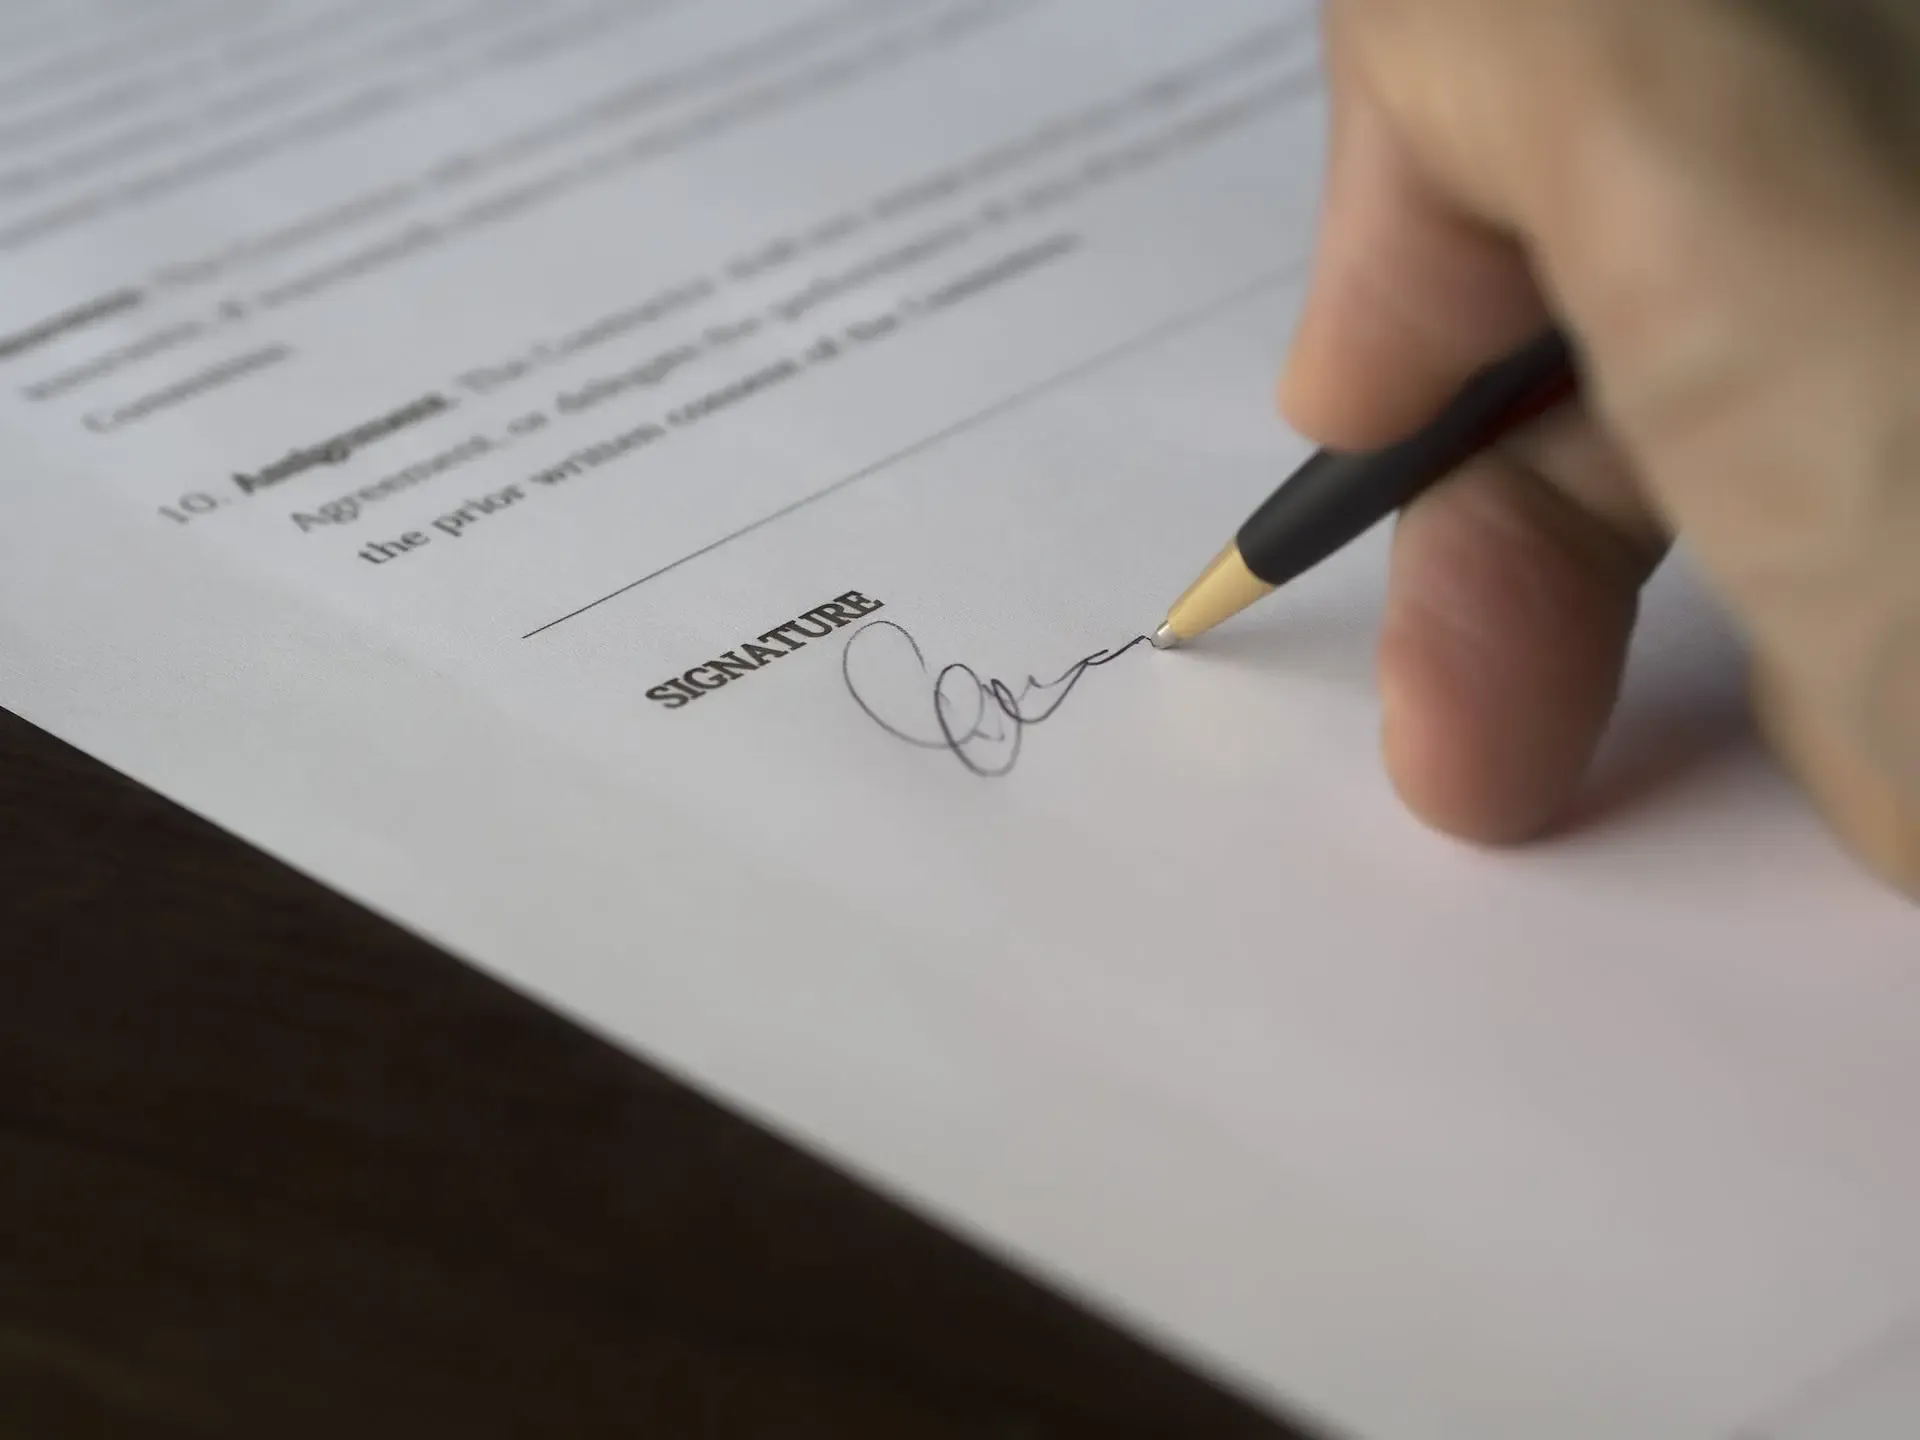 A person signing a document with a section labeled "SIGNATURE."